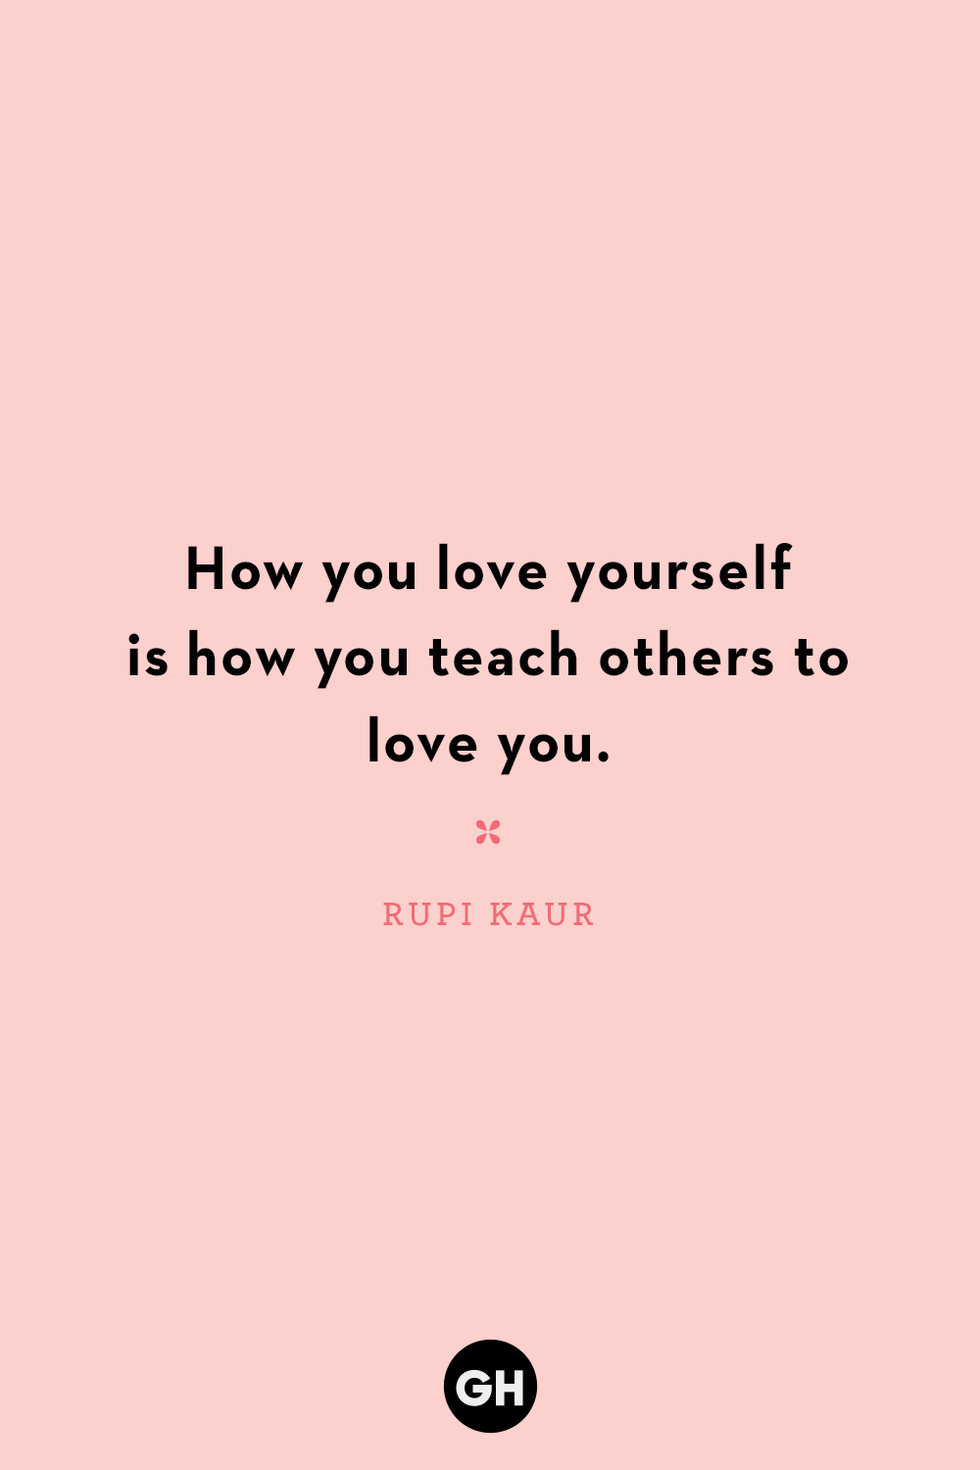 15 Quotes About Self-love for Strong Women to Remember